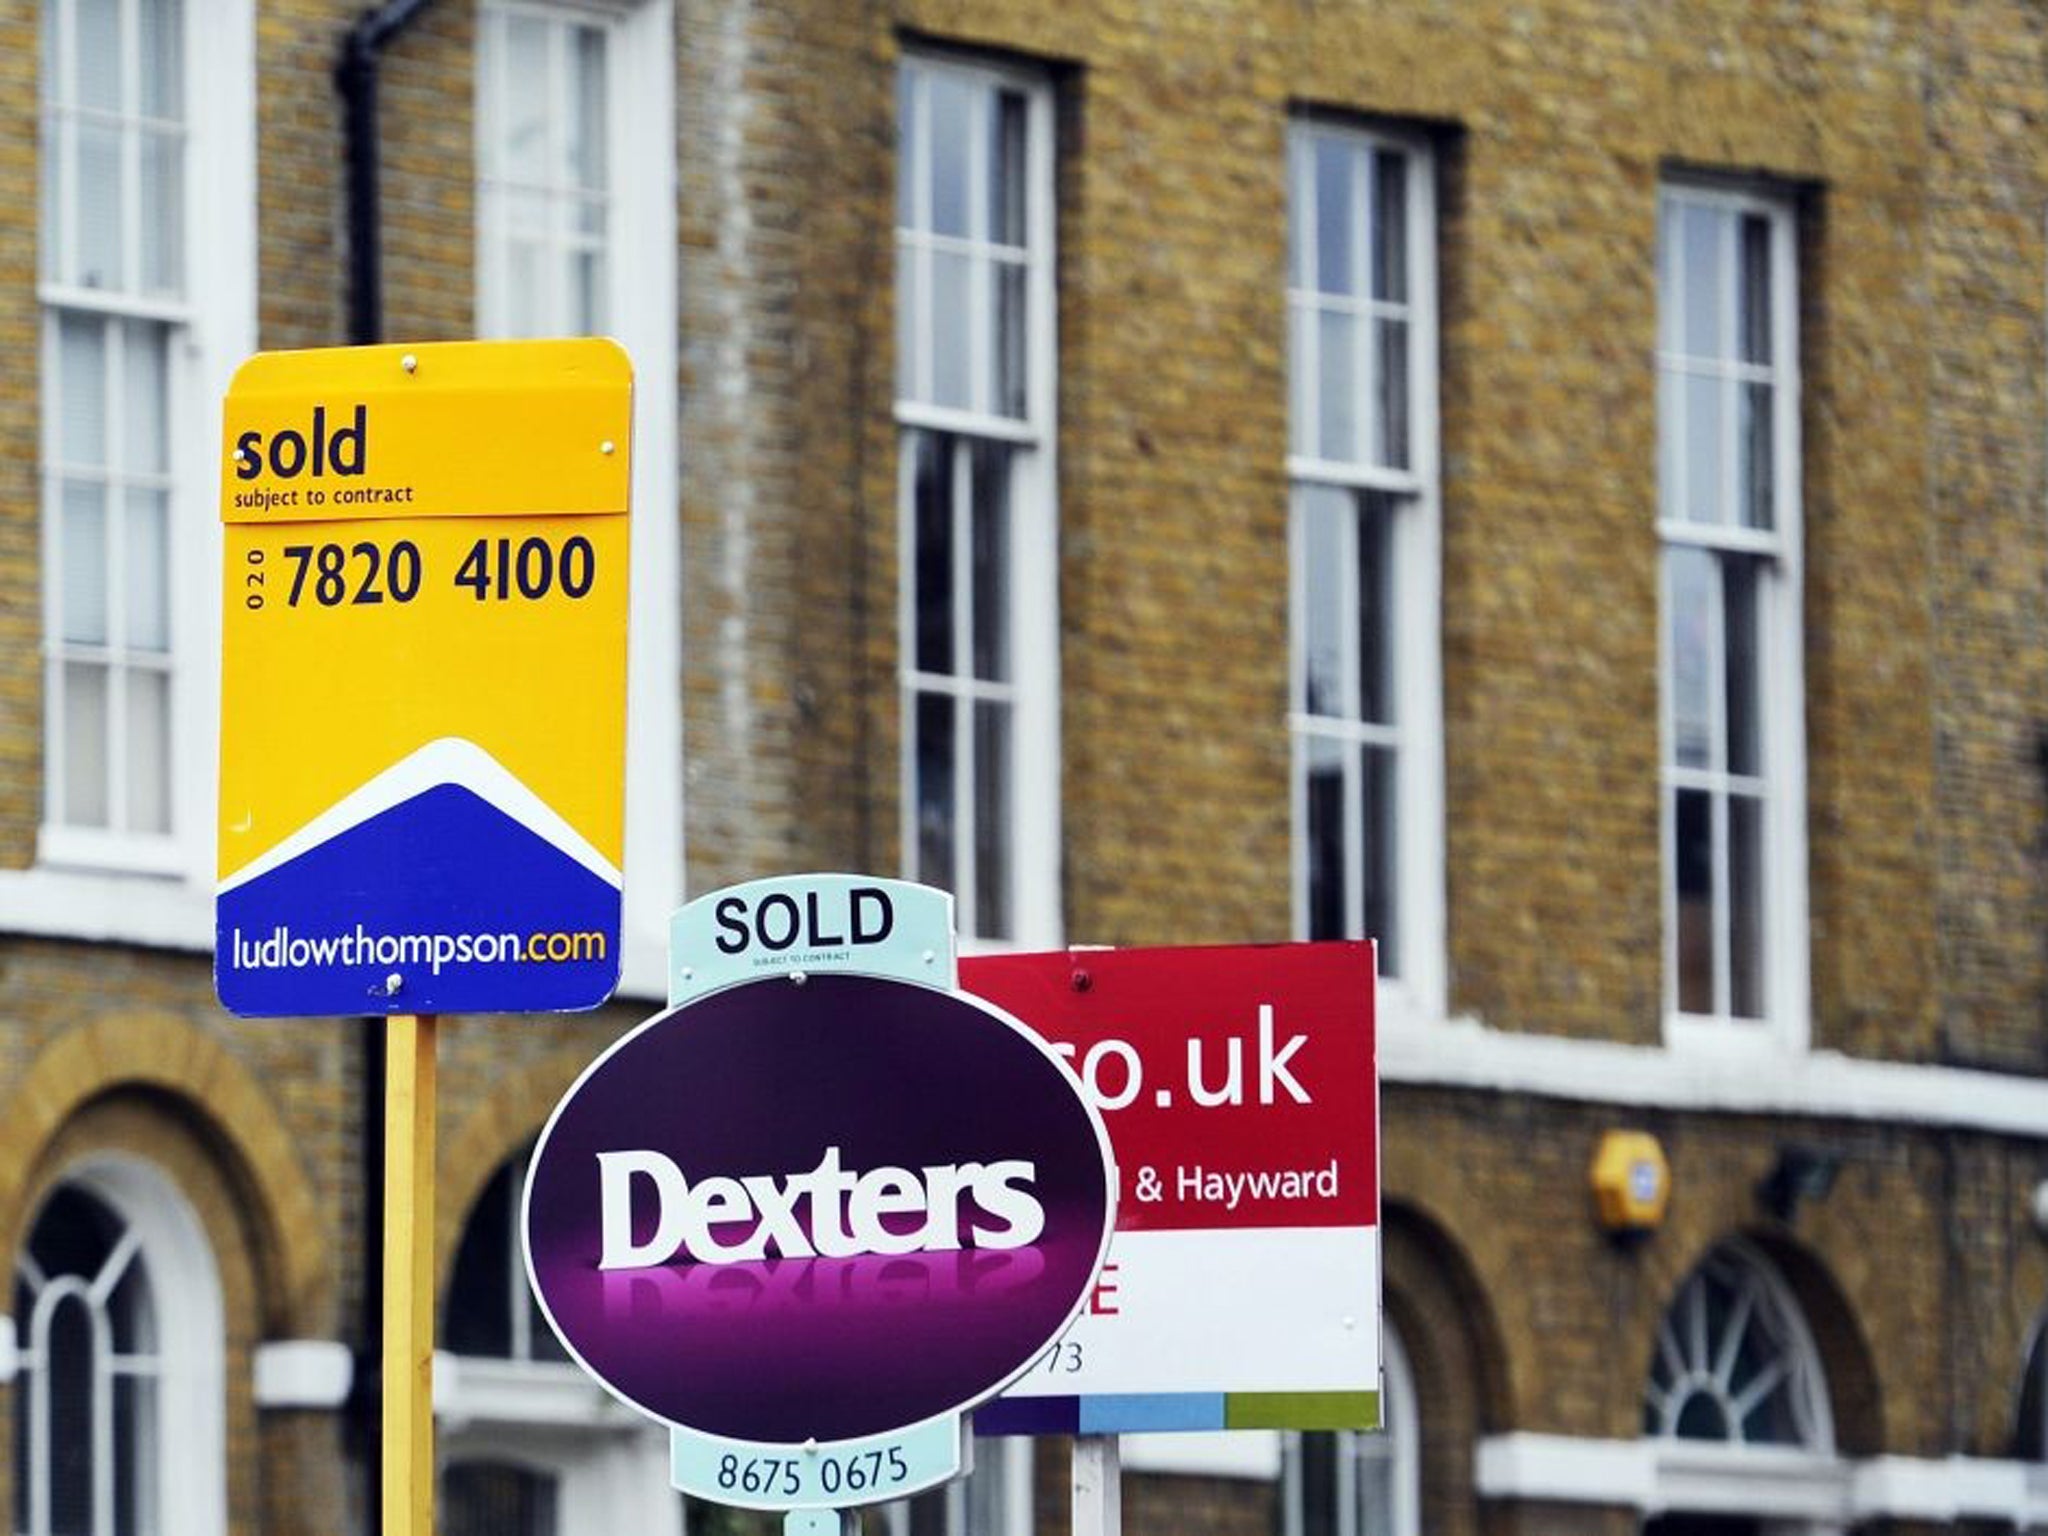 Campaigners are calling for reform of the housing market to protect renters